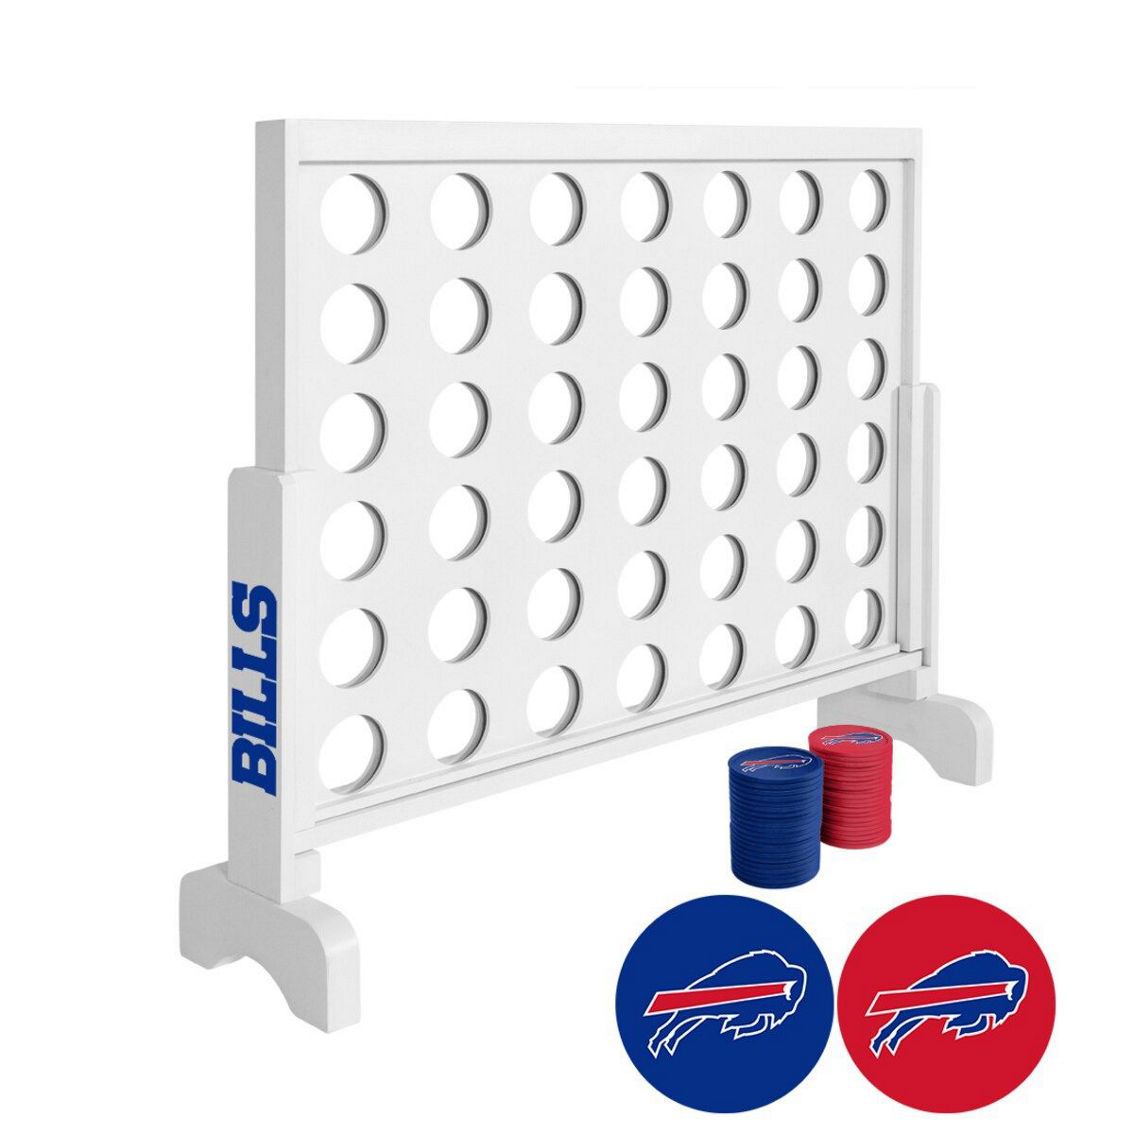 Victory Tailgate Buffalo Bills 3' Giant Victory Four Game Set - Image 3 of 3